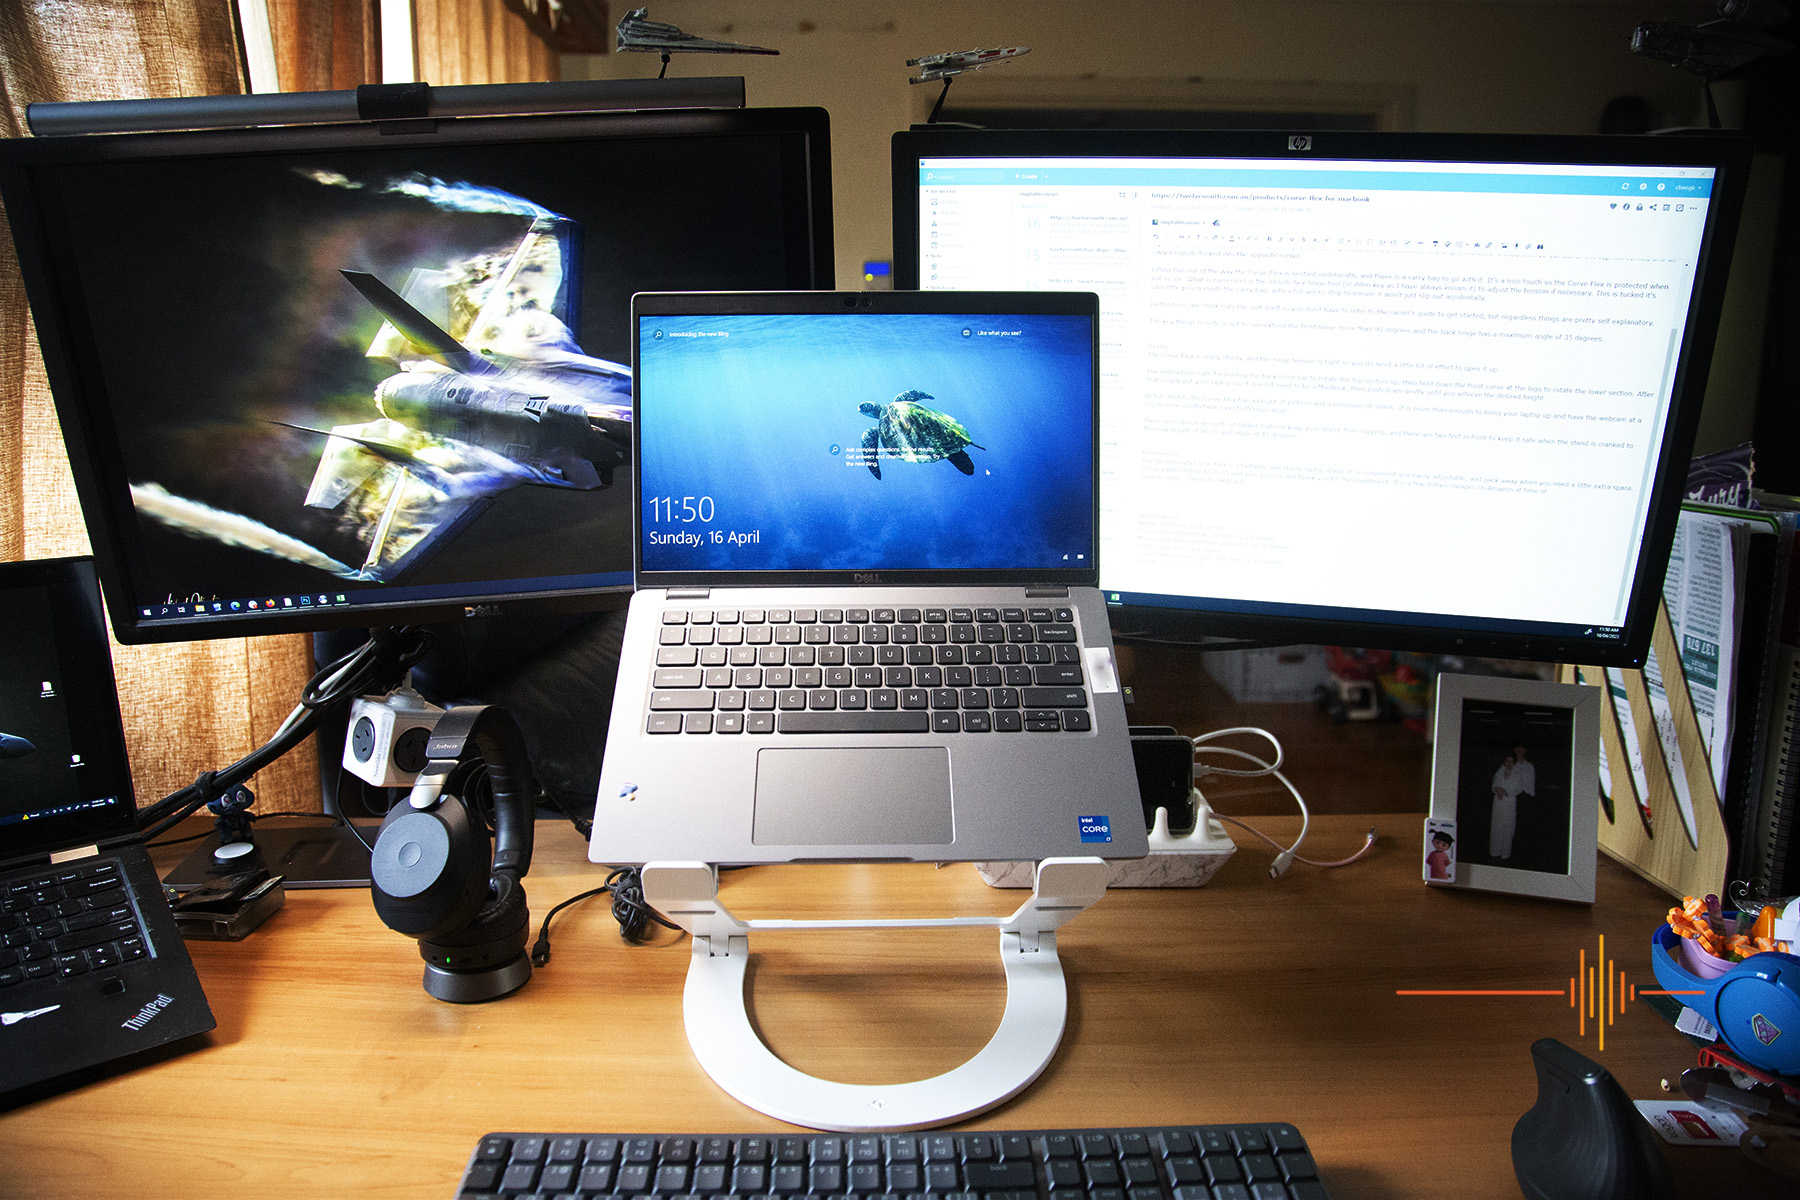 Twelve South Curve Laptop Stand review - The Gadgeteer